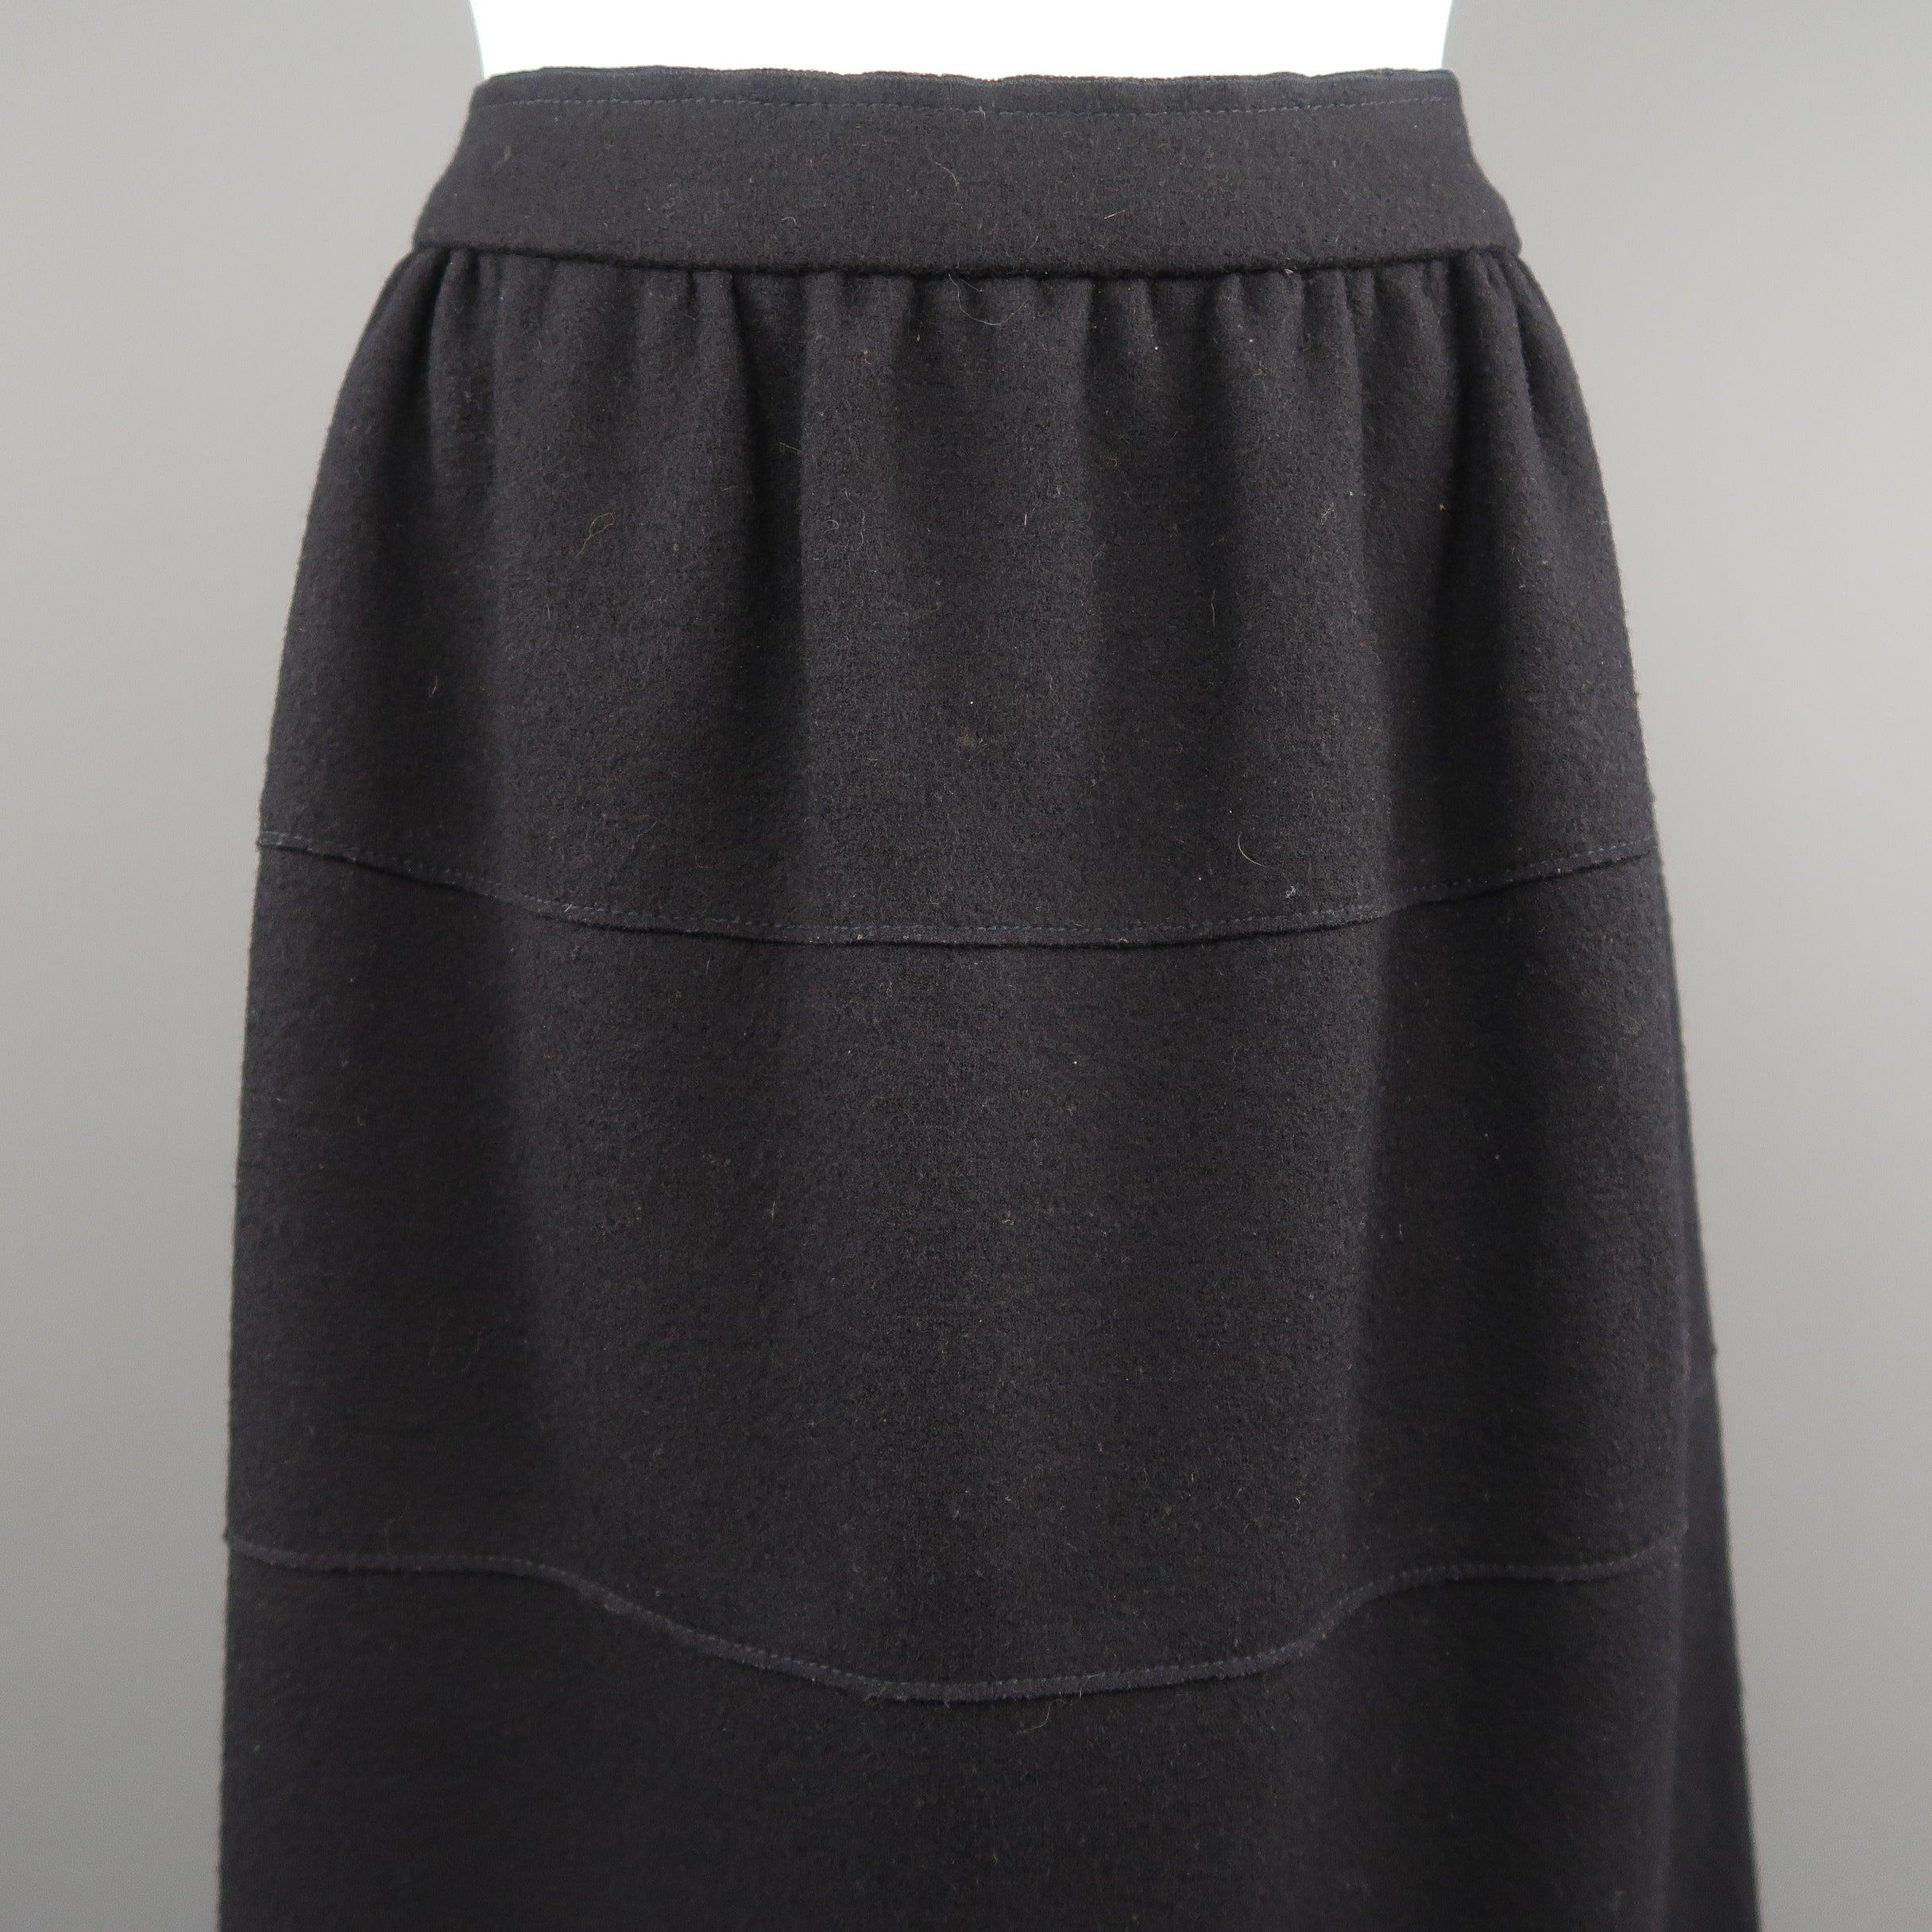 PRADA circle skirt comes in navy virgin wool with a gathered waistband, unlined, tired panel construction. Made in Italy.Excellent Pre-Owned Condition. 

Marked:   IT 40 

Measurements: 
  Waist:
 30 inches Hip: 46 inches Length: 20 inches 
  
  
